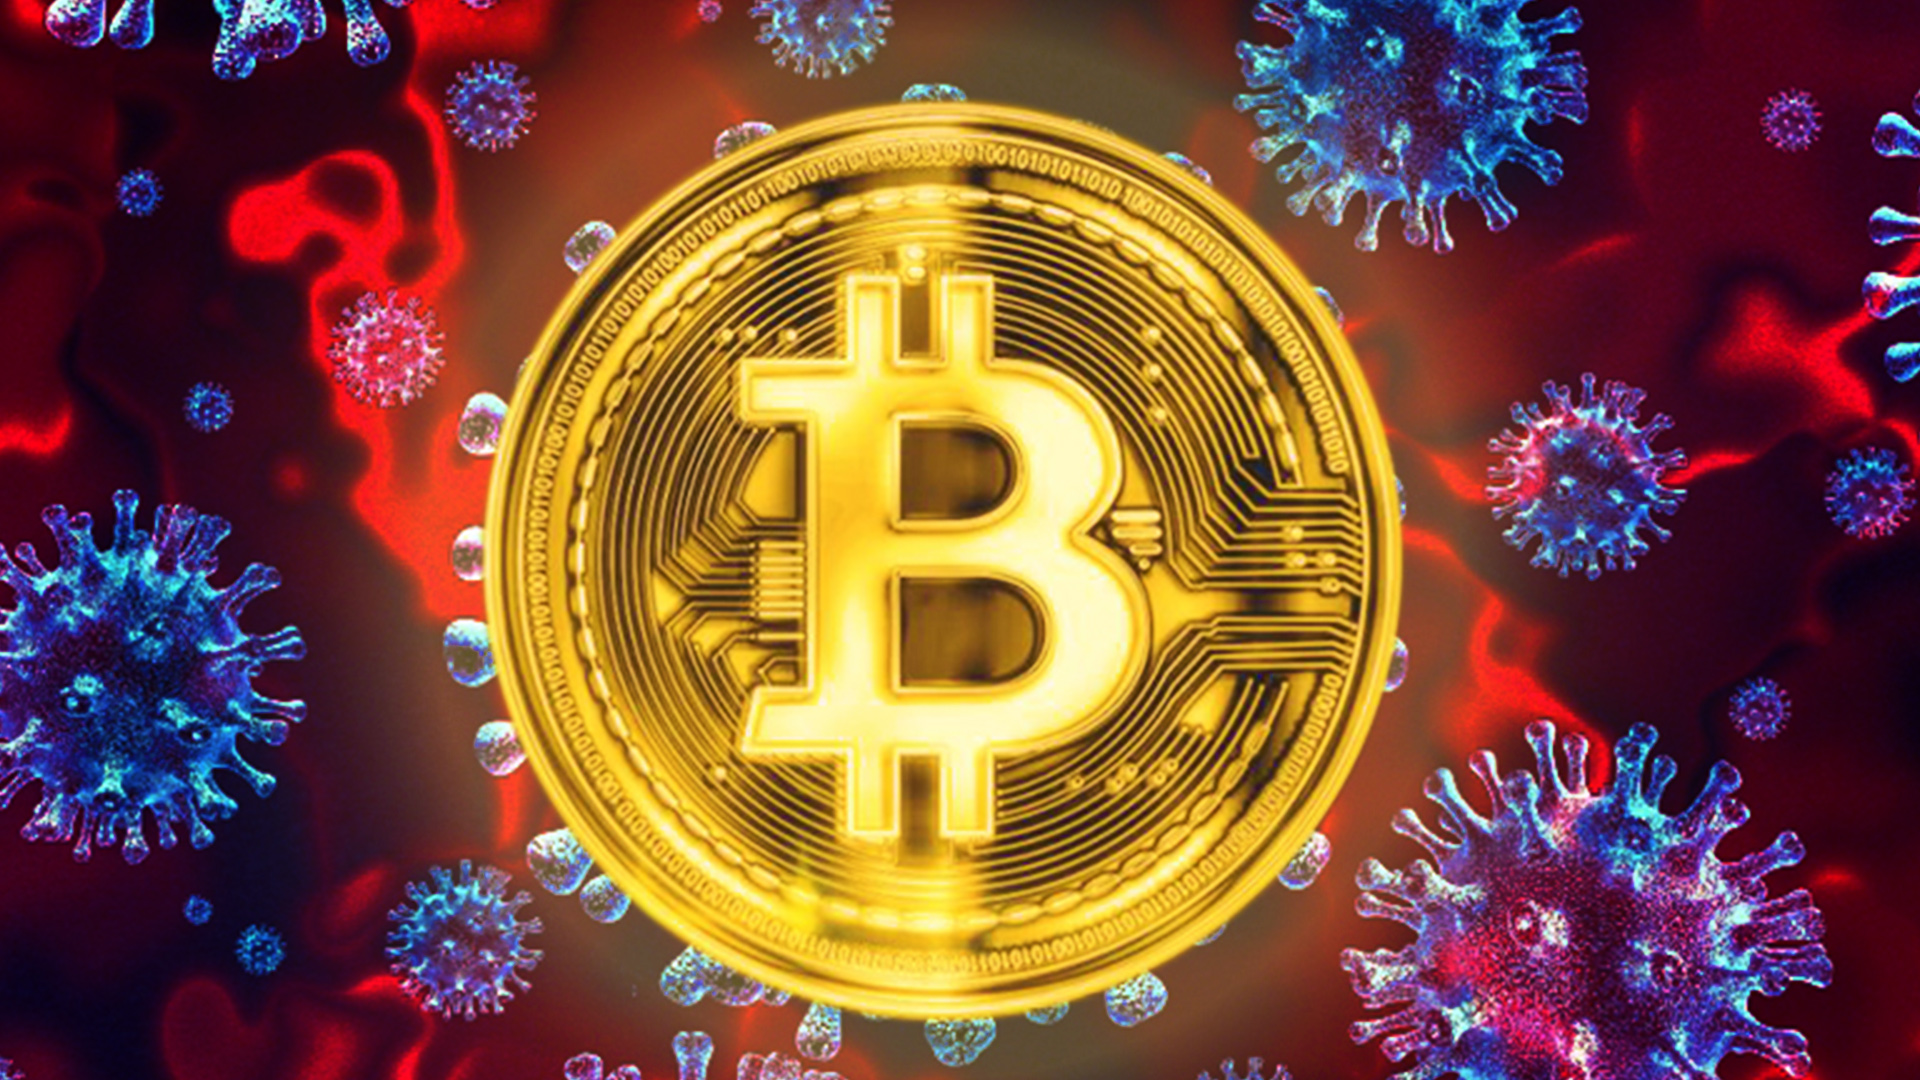 During the coronavirus, are cryptocurrencies suffering or taking advantage of the moment